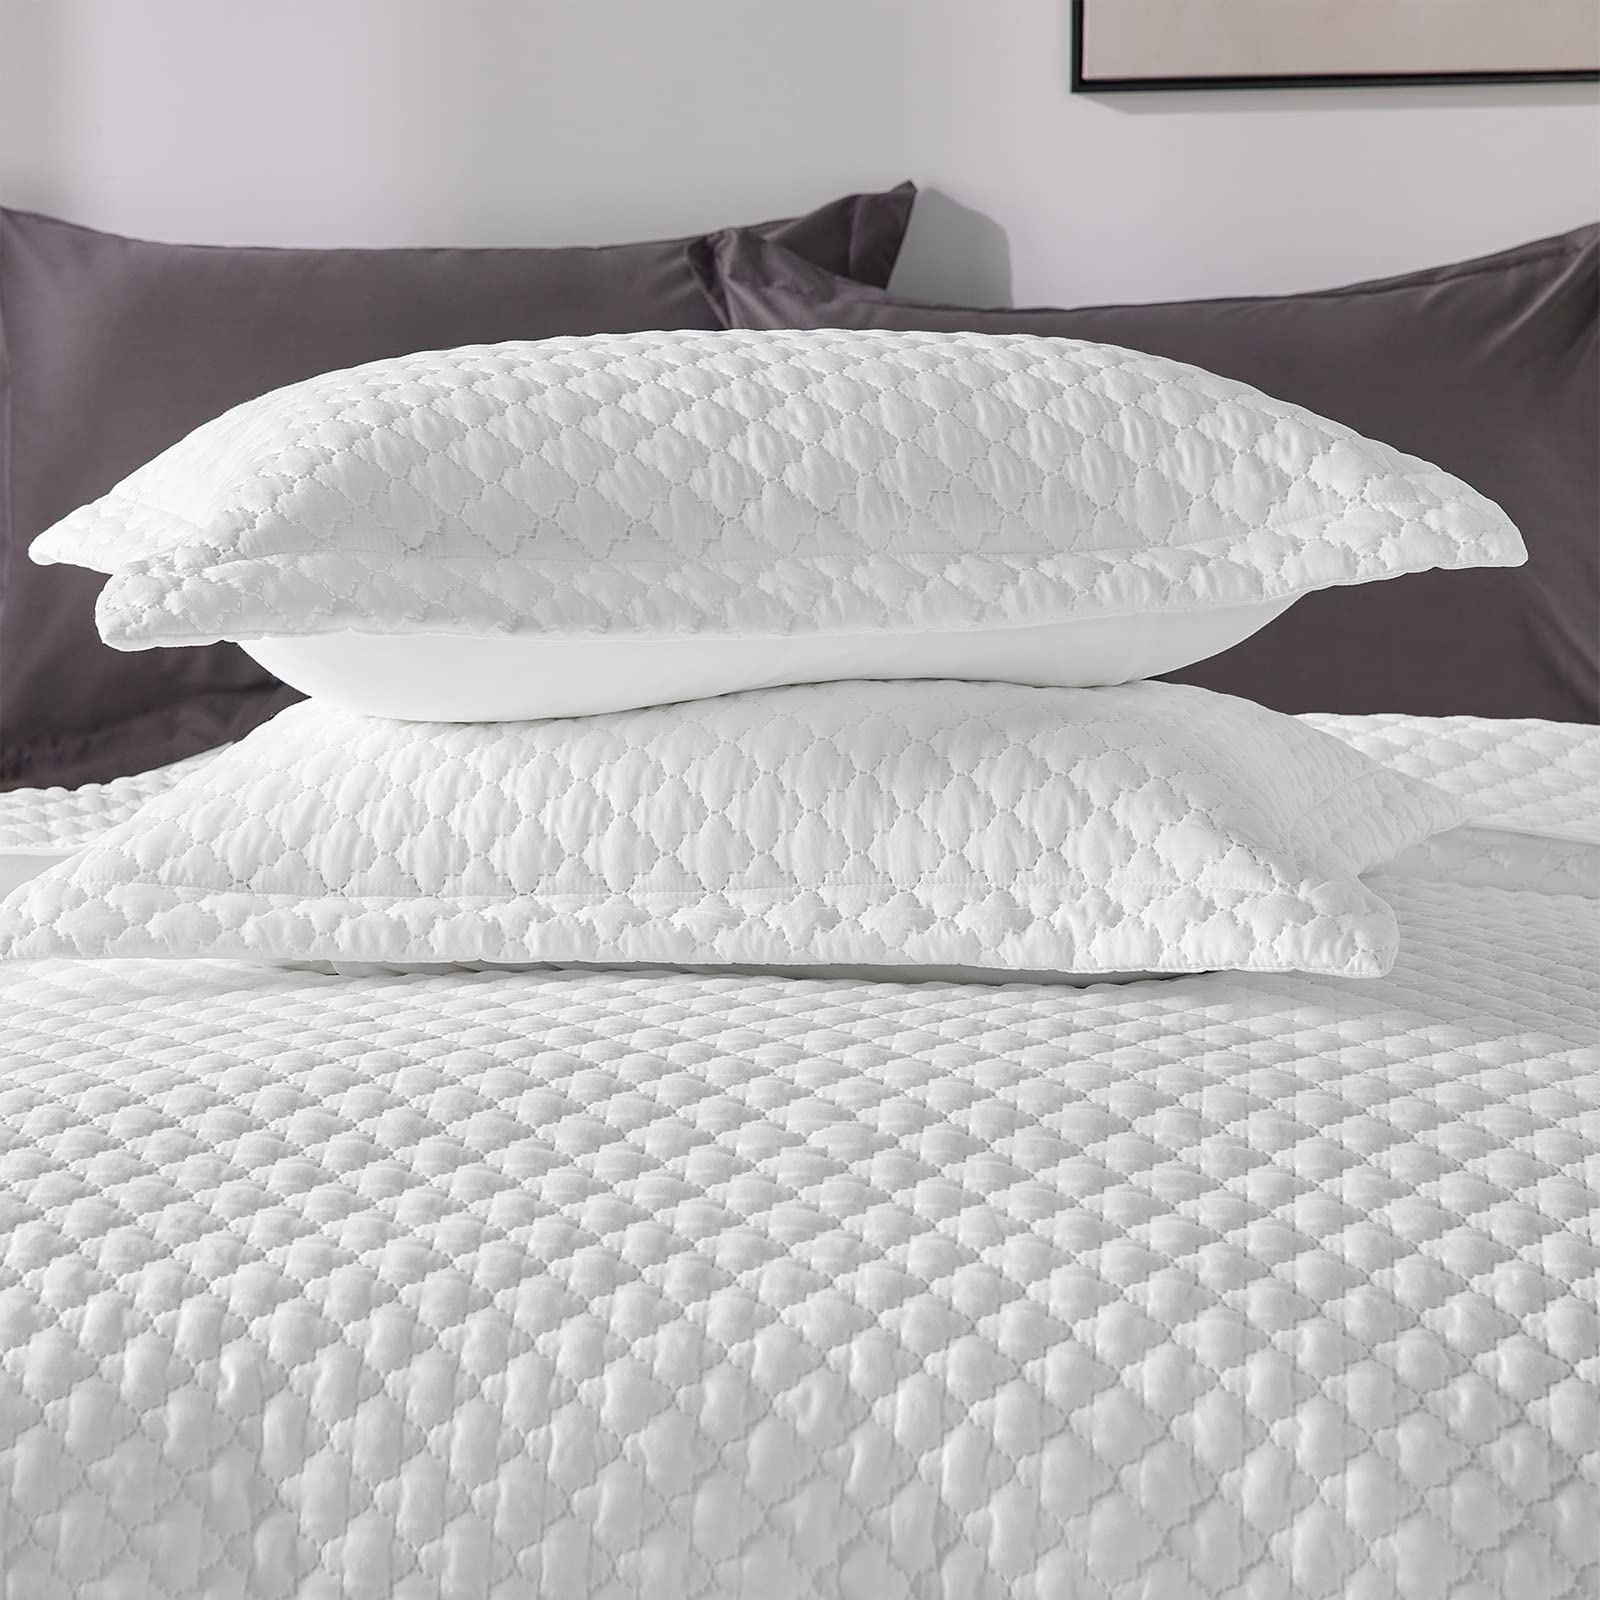 CozyLux Summer Quilt Sets Queen/Full Size White 3 Pieces - Lightweight Soft Bedspread - Lantern Ogee Pattern Coverlet Bedding Set for All Season - 1 Quilt and 2 Pillow Shams - White, 90"x96"